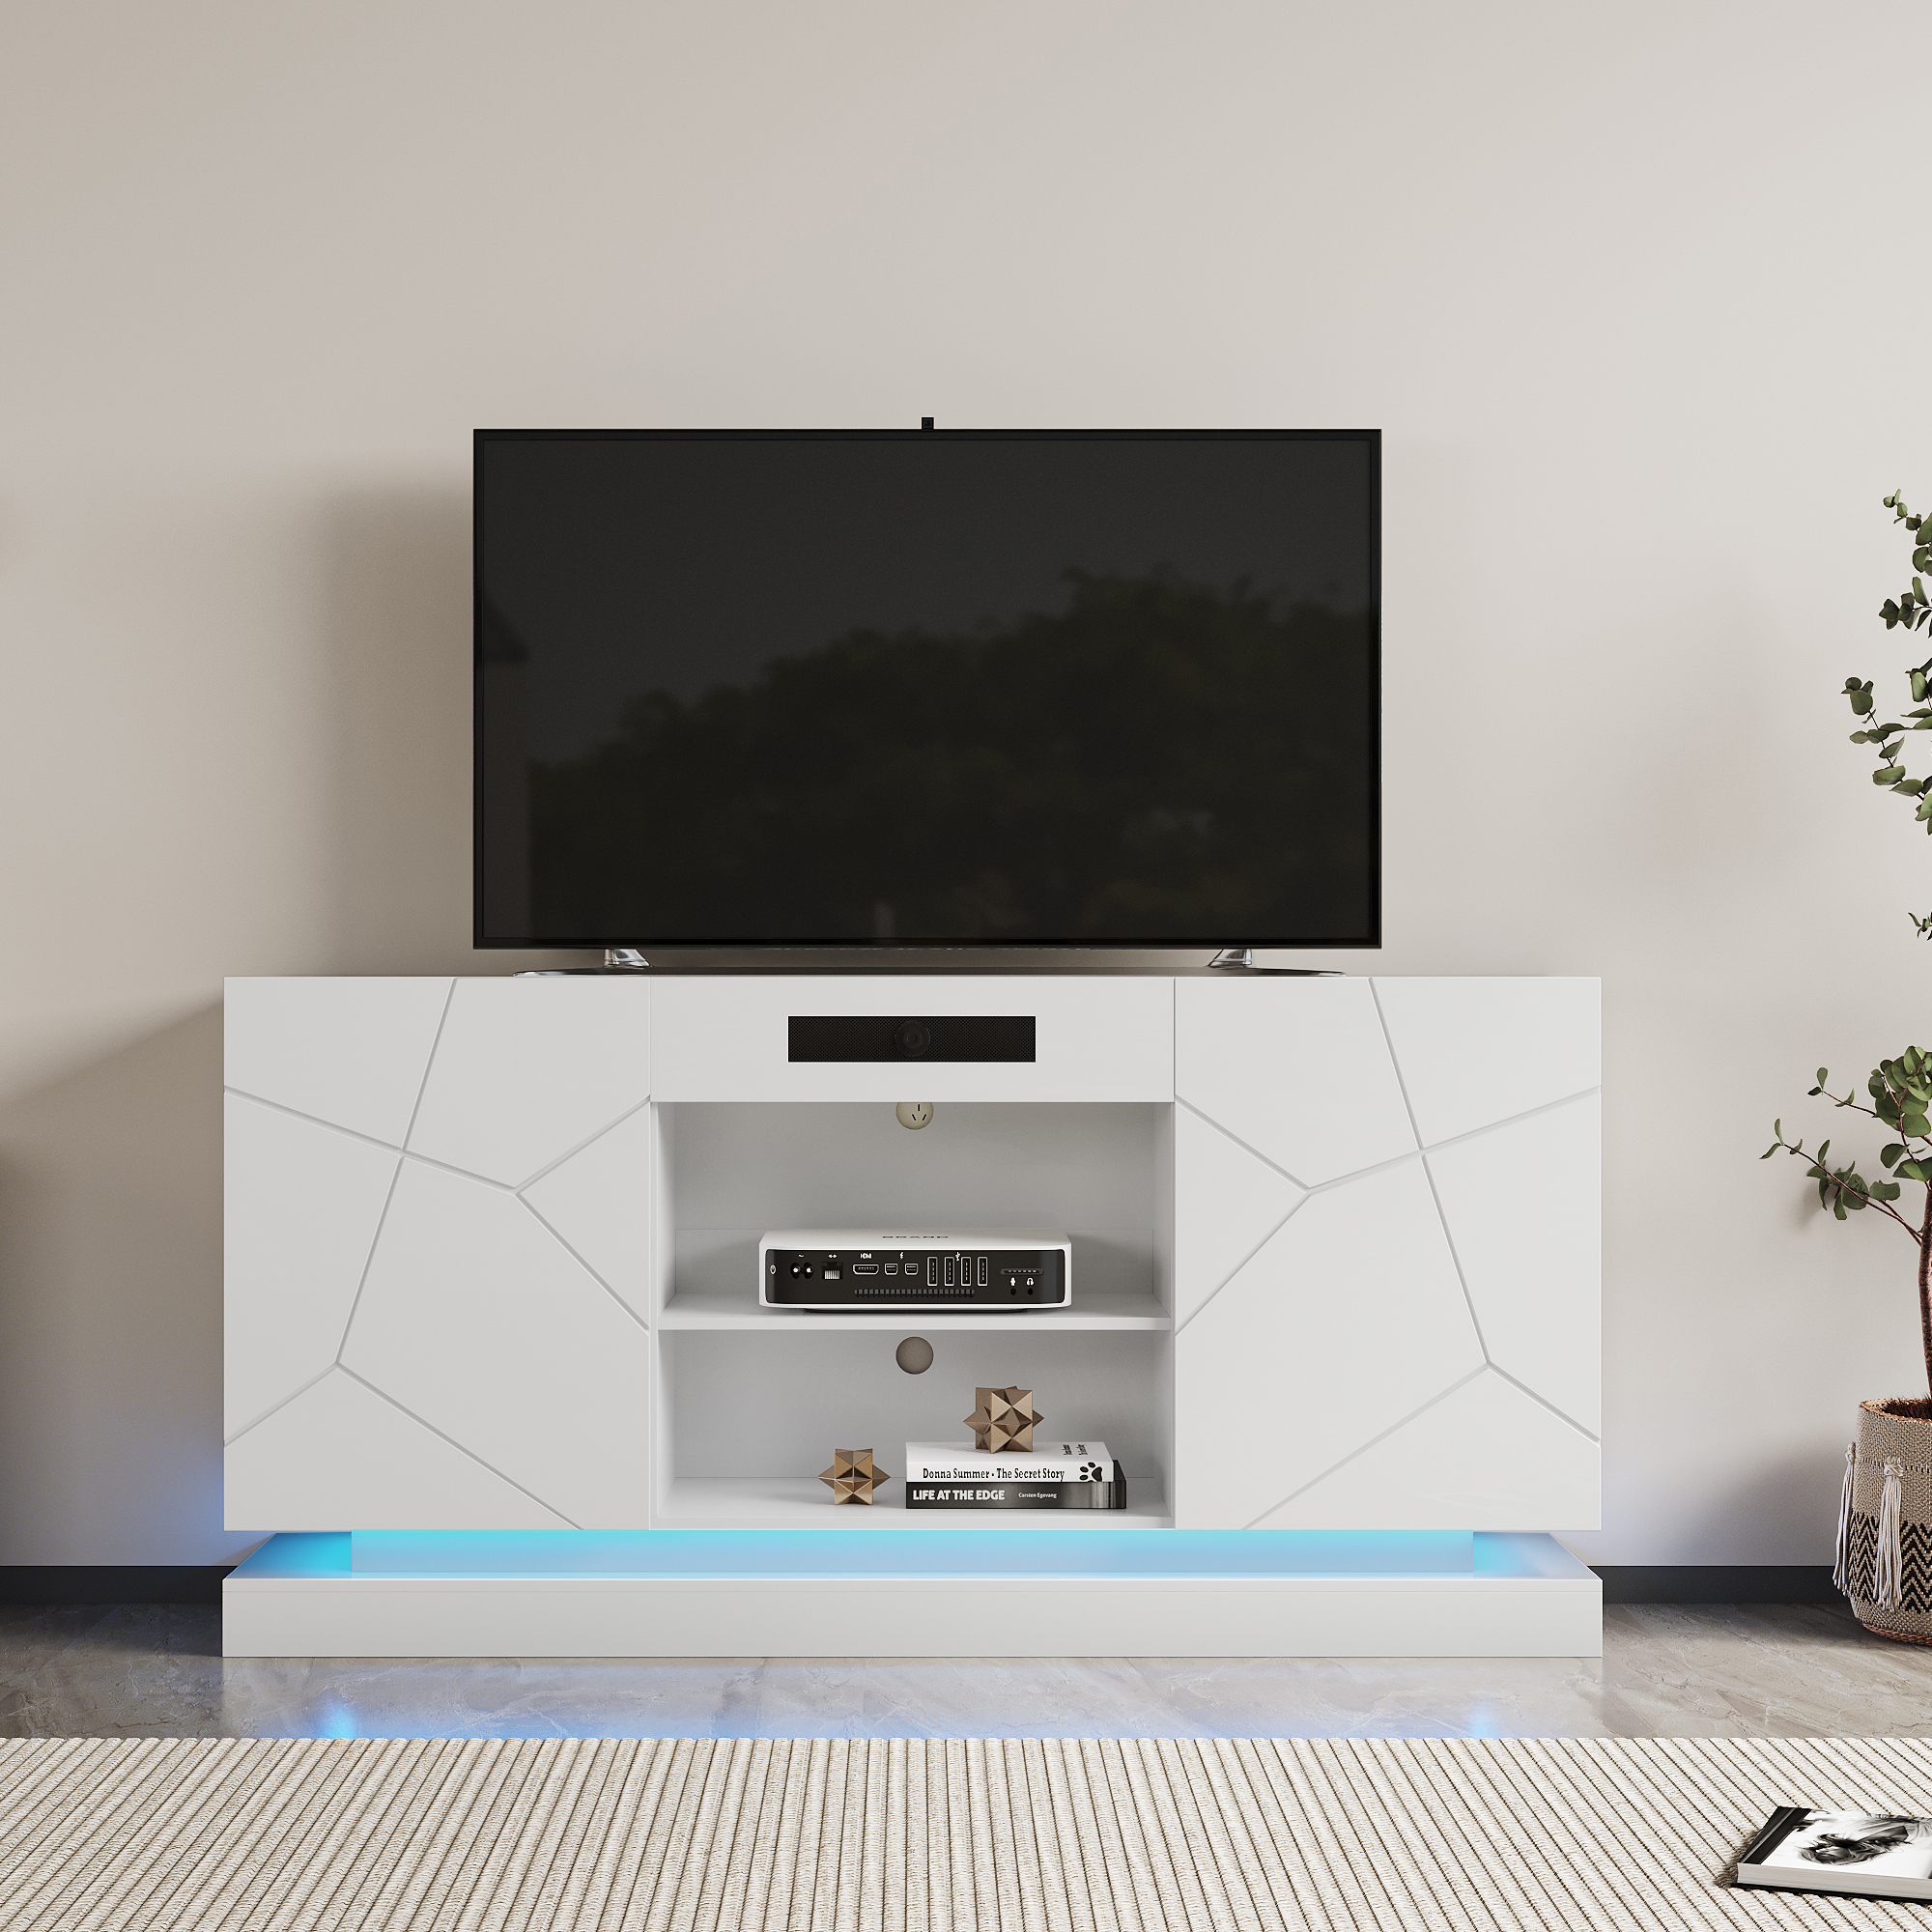 Montary TV Cabinet with Bluetooth Speaker - Modern Entertainment